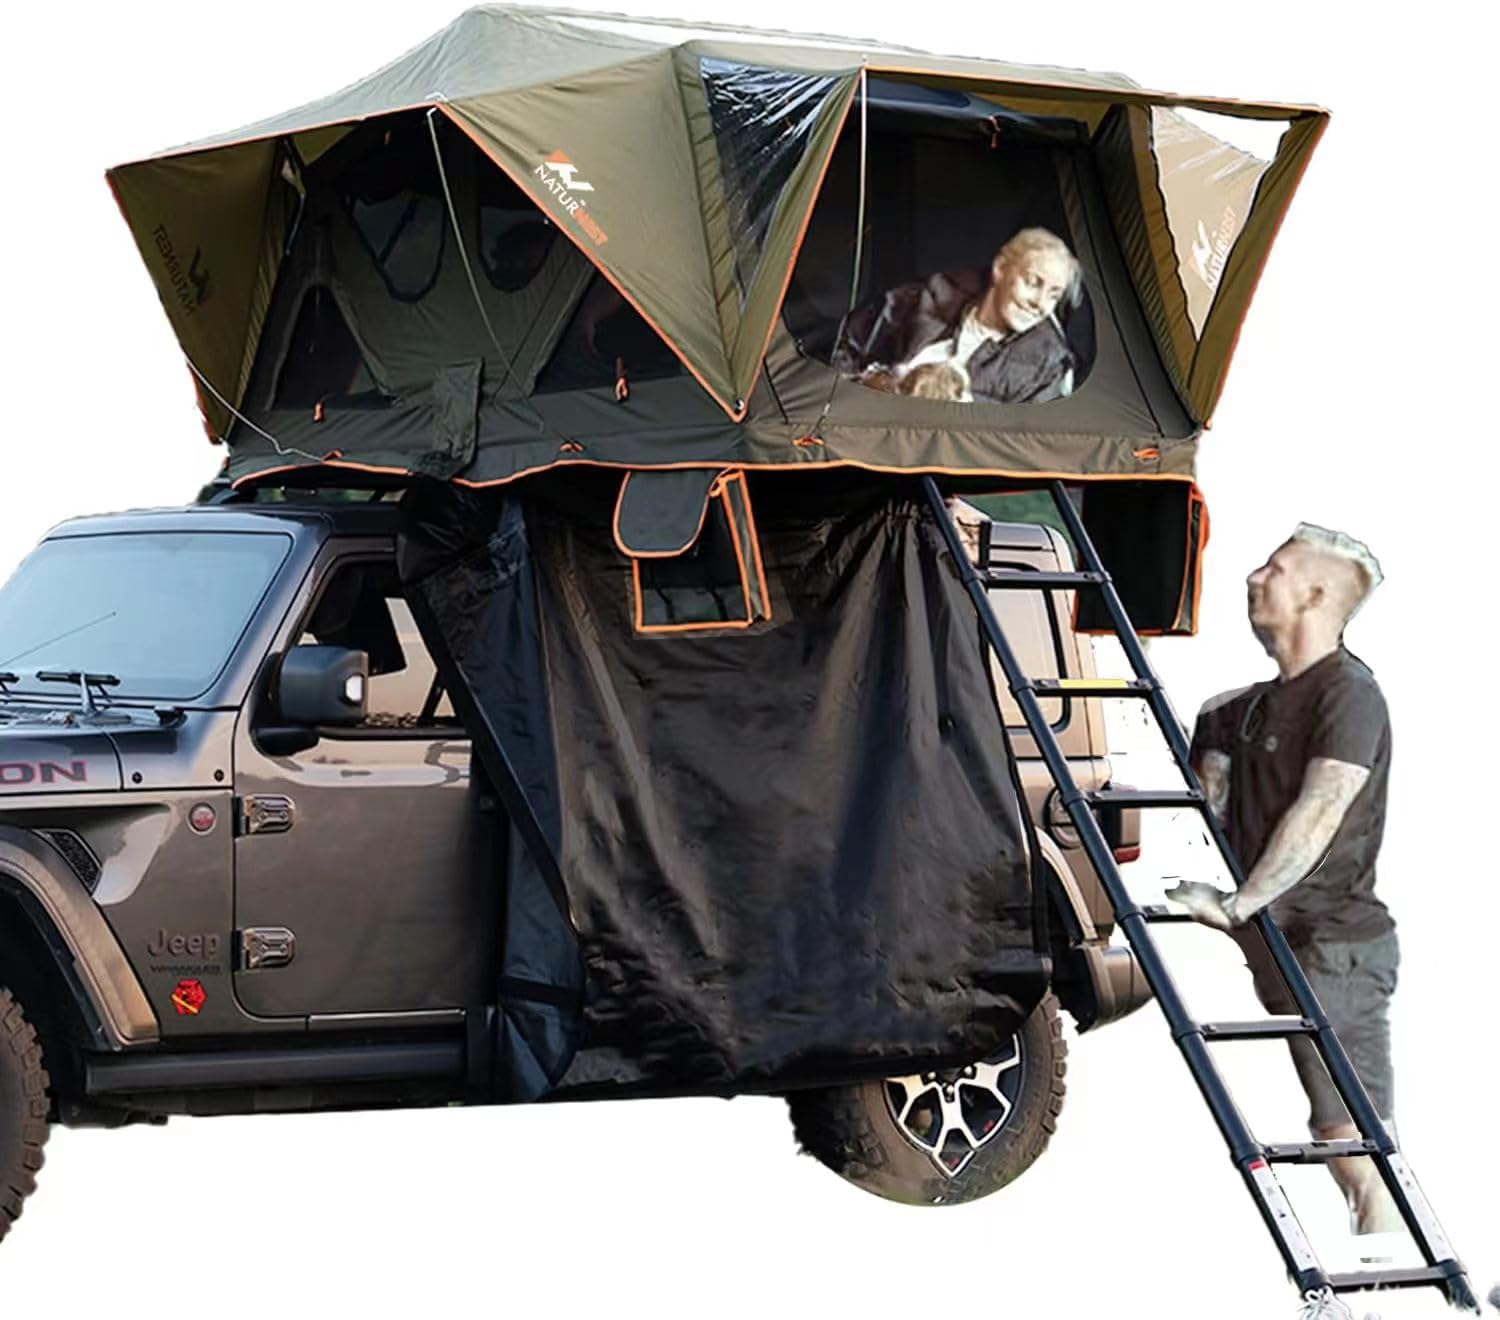 <a href="https://www.amazon.com/Colegence-Oversized-Camping-Support-Included/dp/B0CF9GQRBC?tag=thecampfire0d-20"></a><a href="https://www.amazon.com/dp/B0CL545HQX?%3Fth=1&psc=1&tag=thecampfire0d-20">LEADWIN Naturnest Rooftop Tent</a>